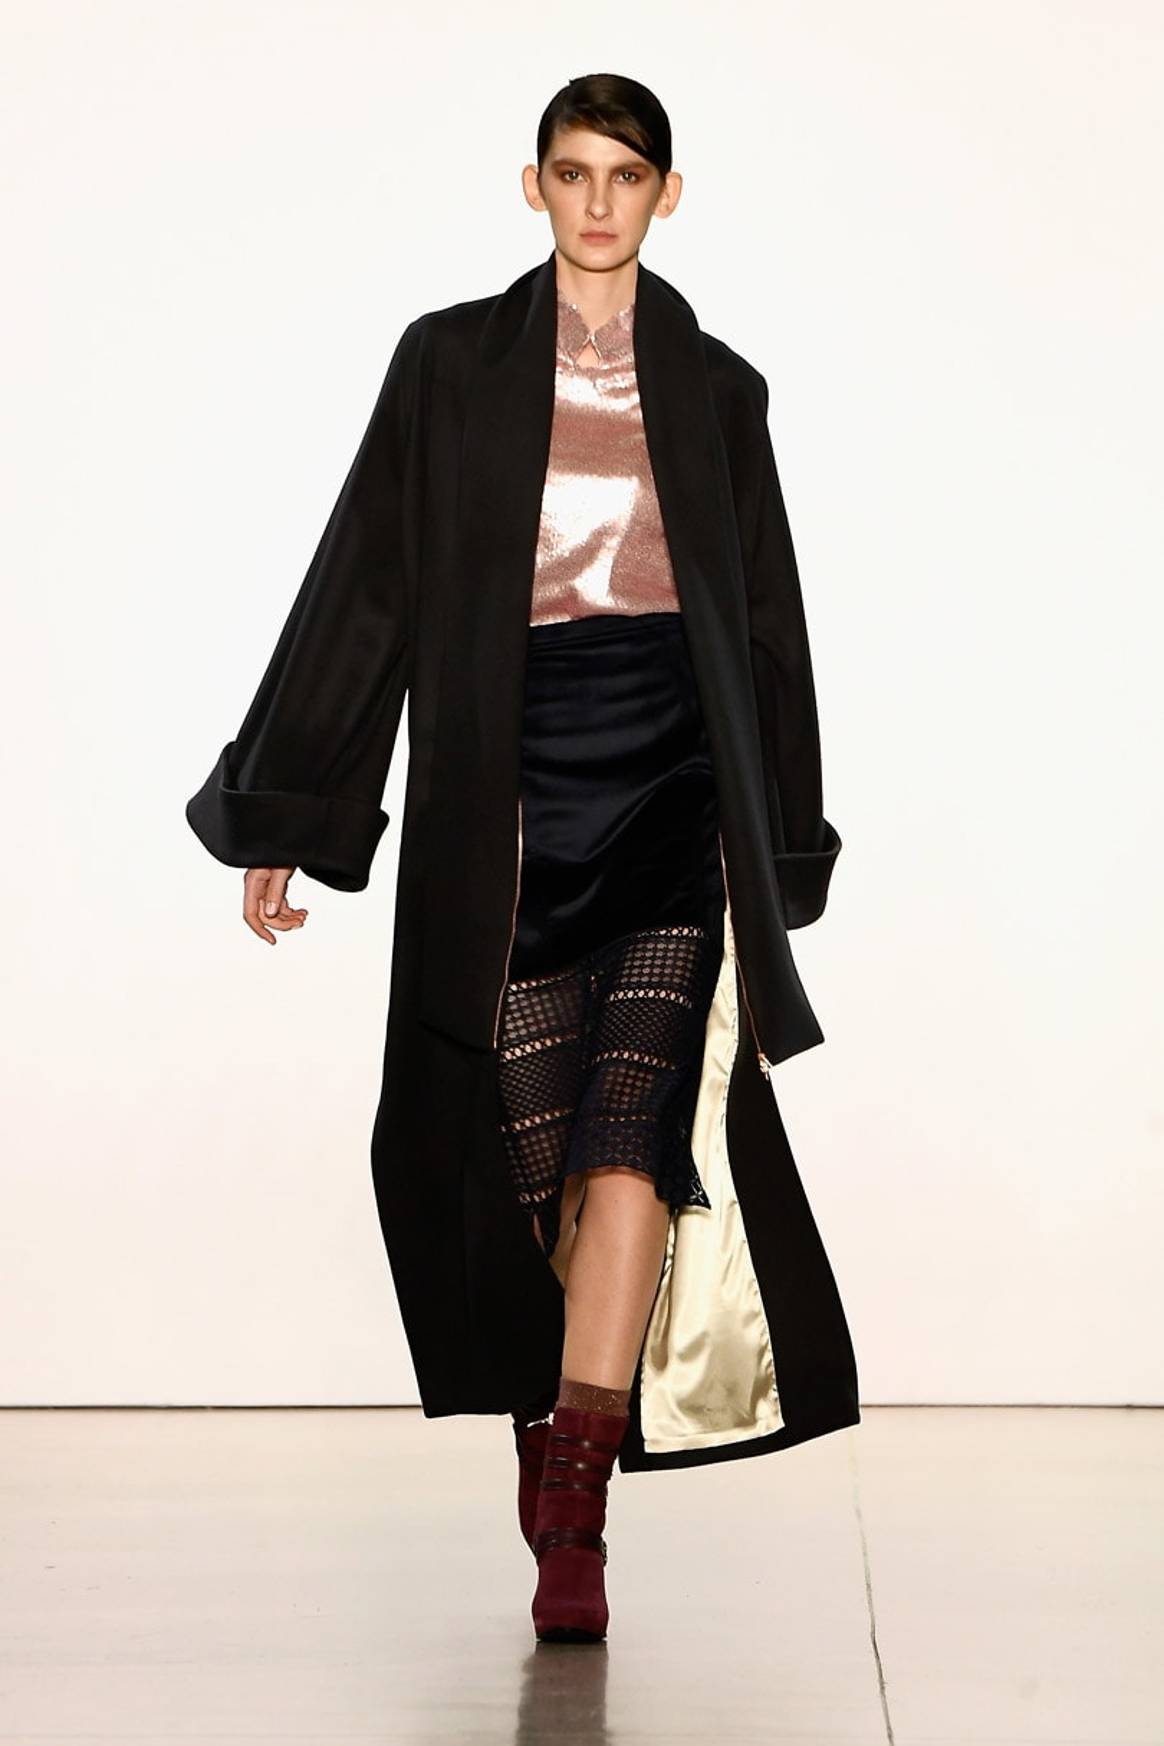 Marcel Ostertag keeps it 70s style for New York Fashion Week